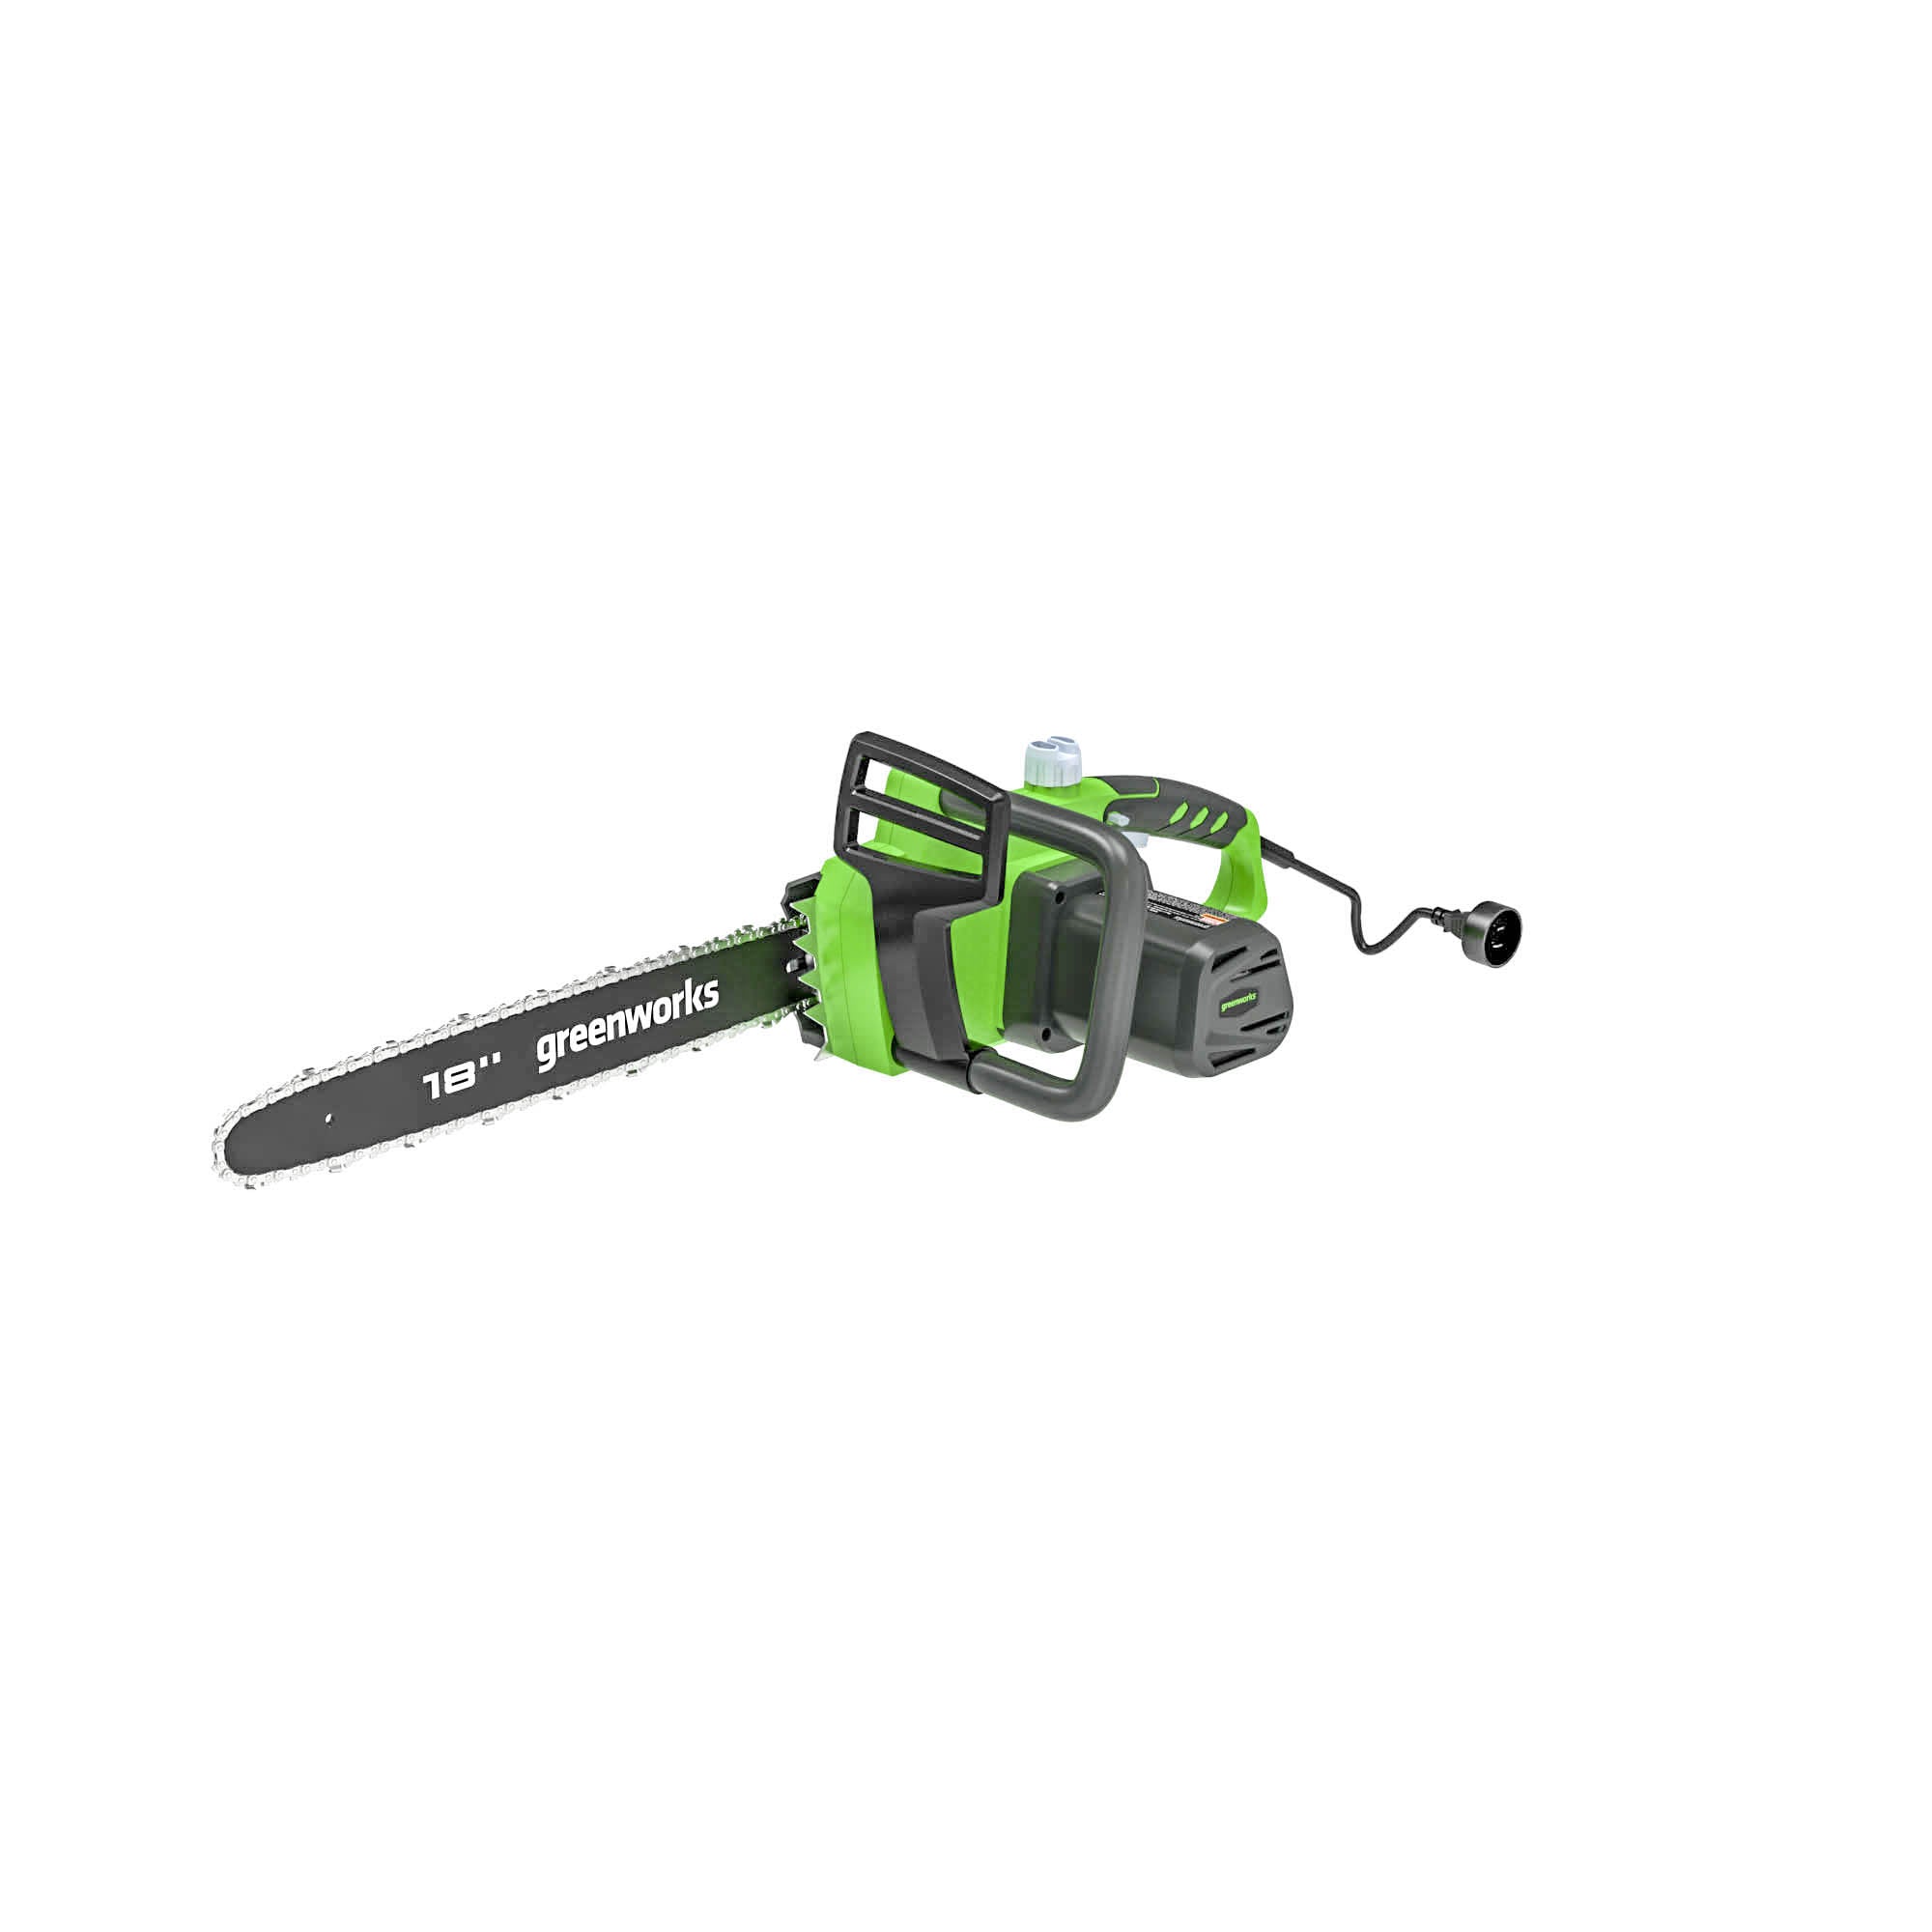 Greenworks 14.5 Amp Corded 18-Inch Chainsaw – Greenworks Tools